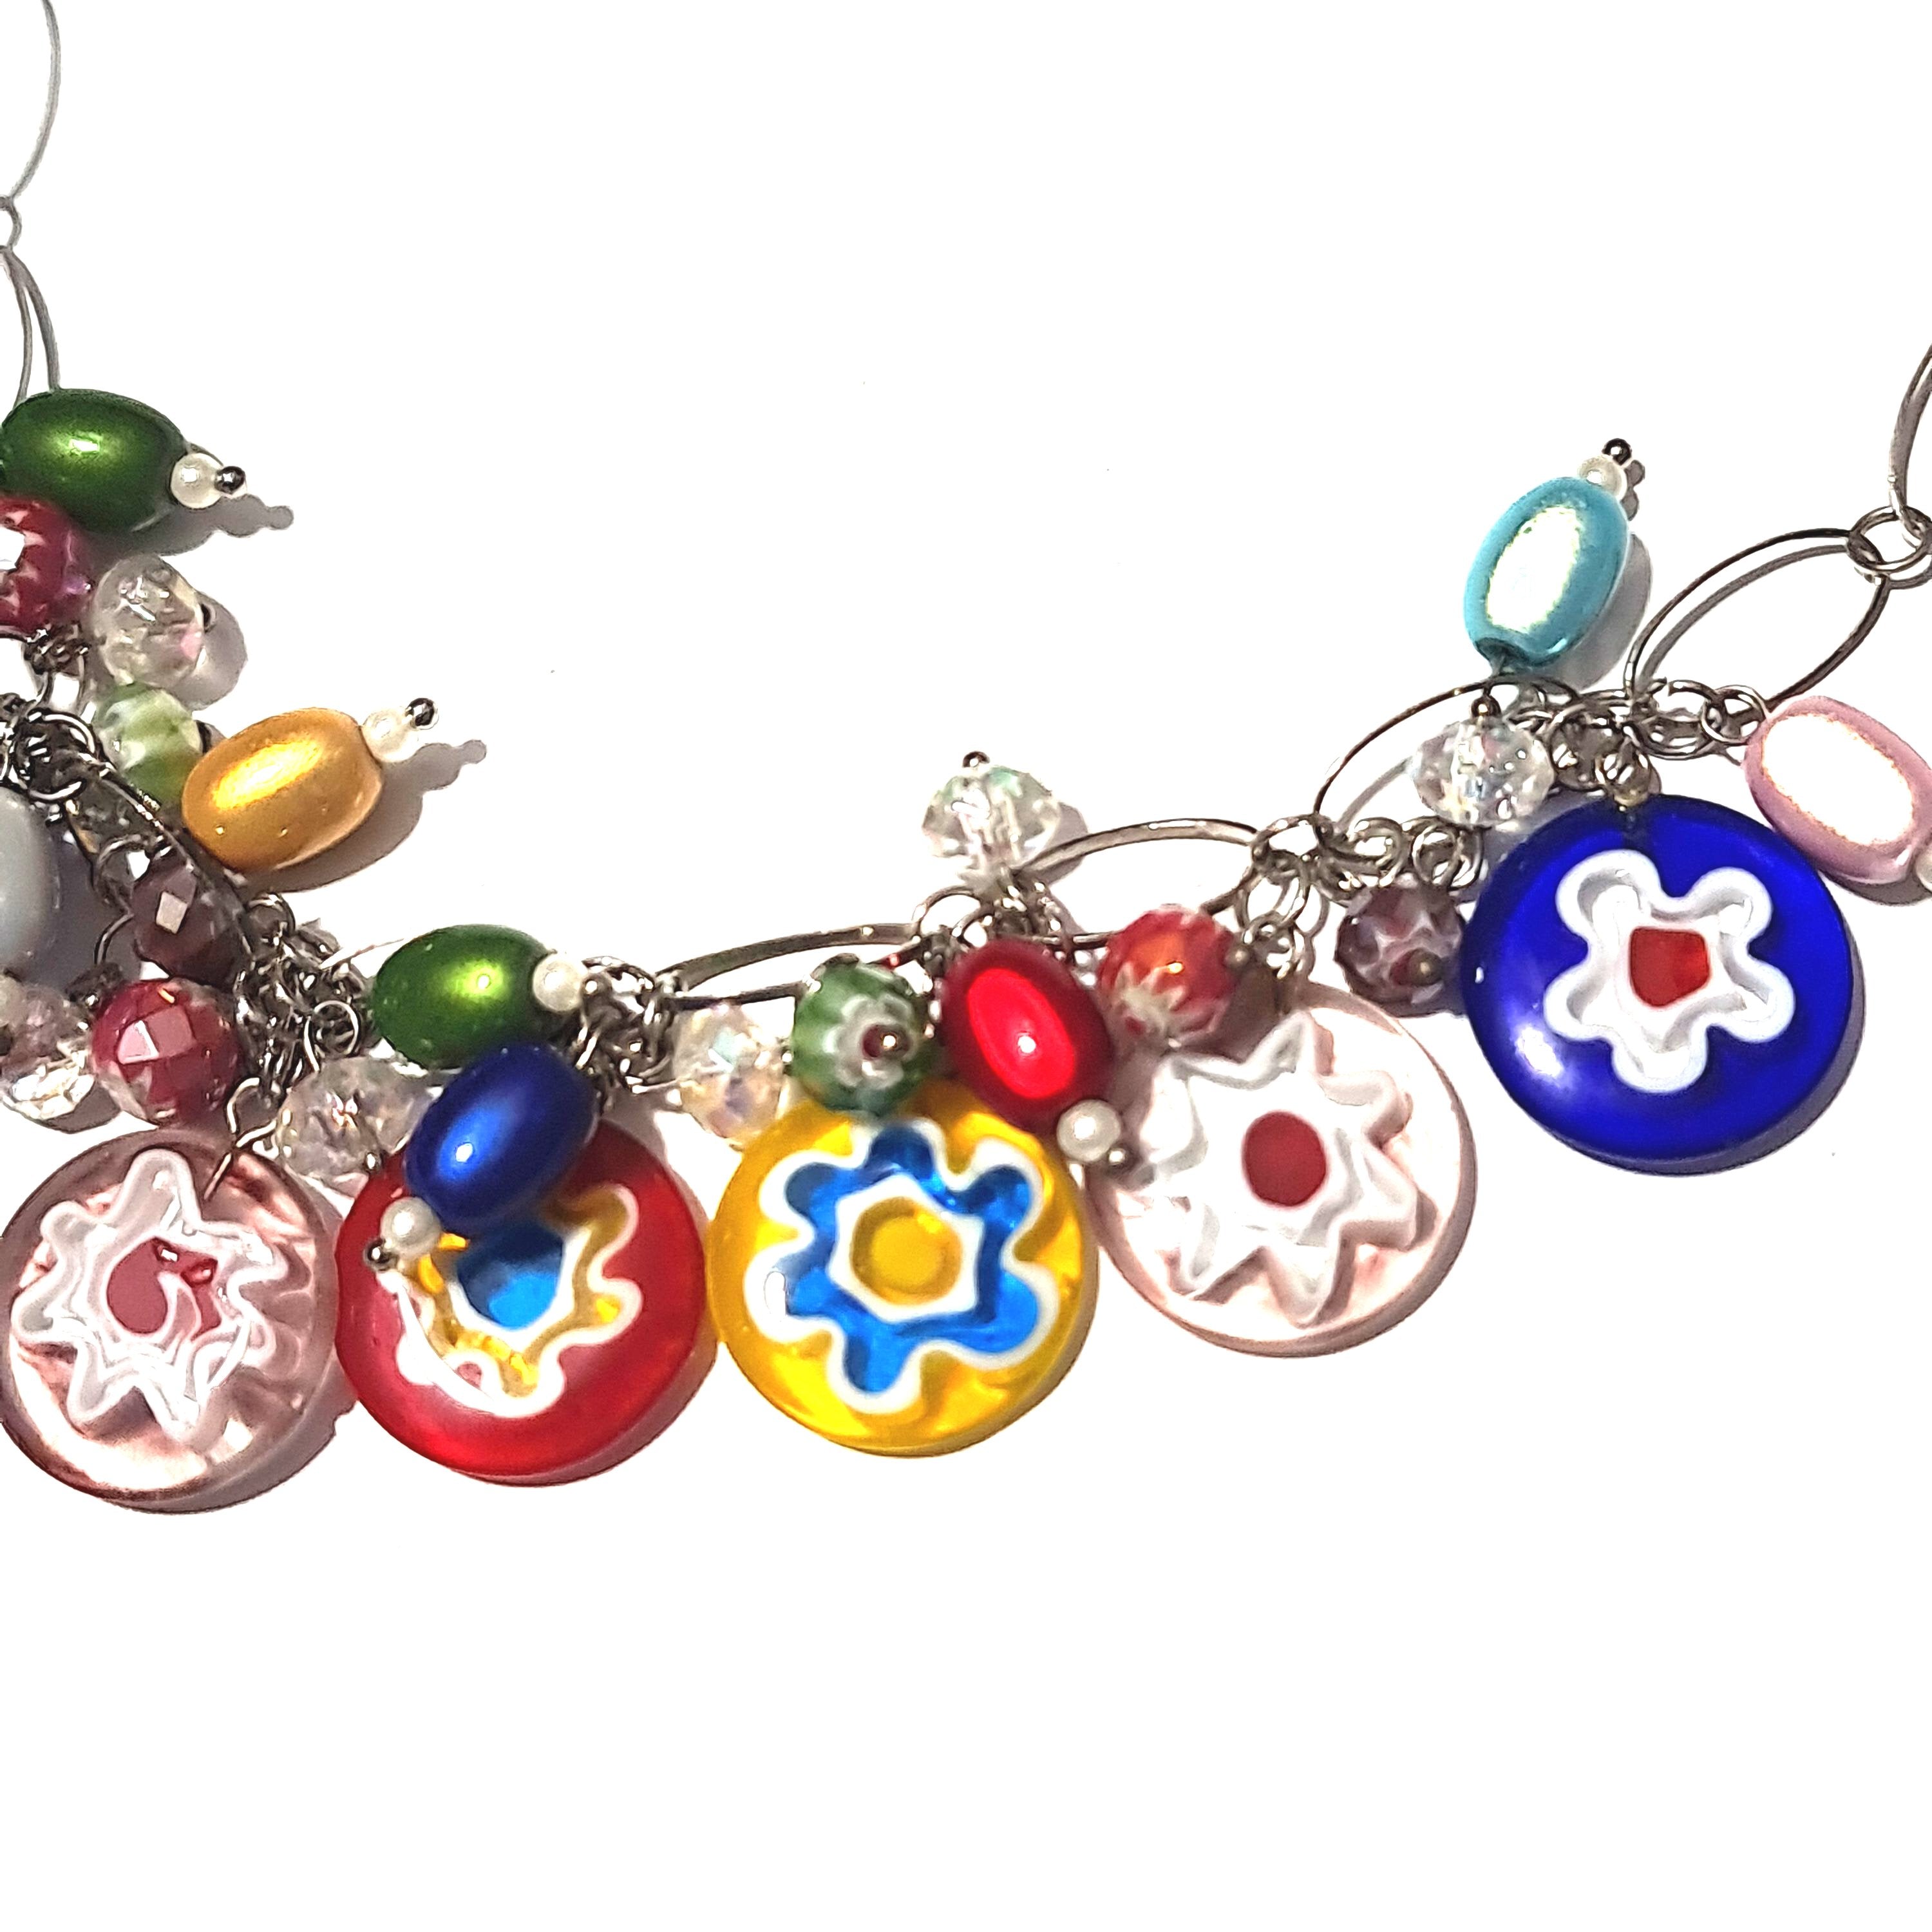 Stunning Glass Multicolored Necklace